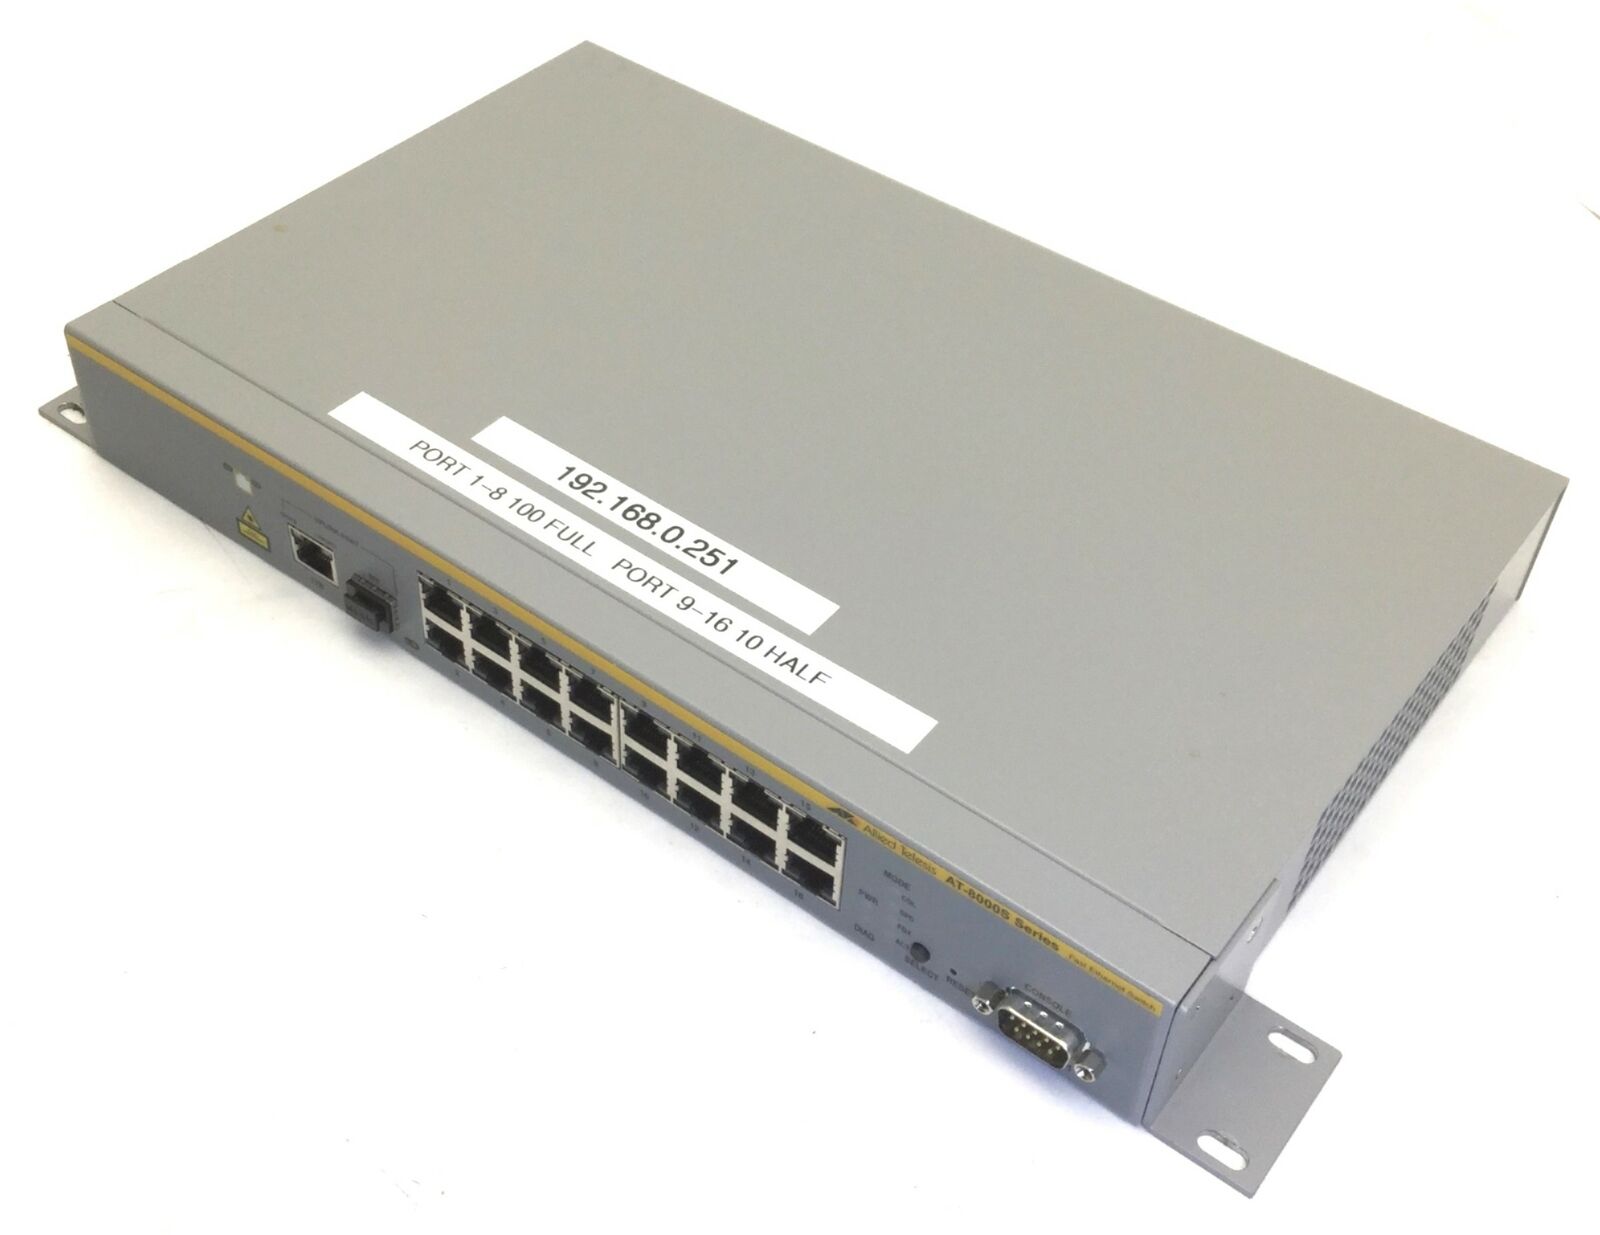 Allied Telesyn AT-8000S/16 Fast Ethernet Switch, 100-240VAC, .75A, 50-60Hz